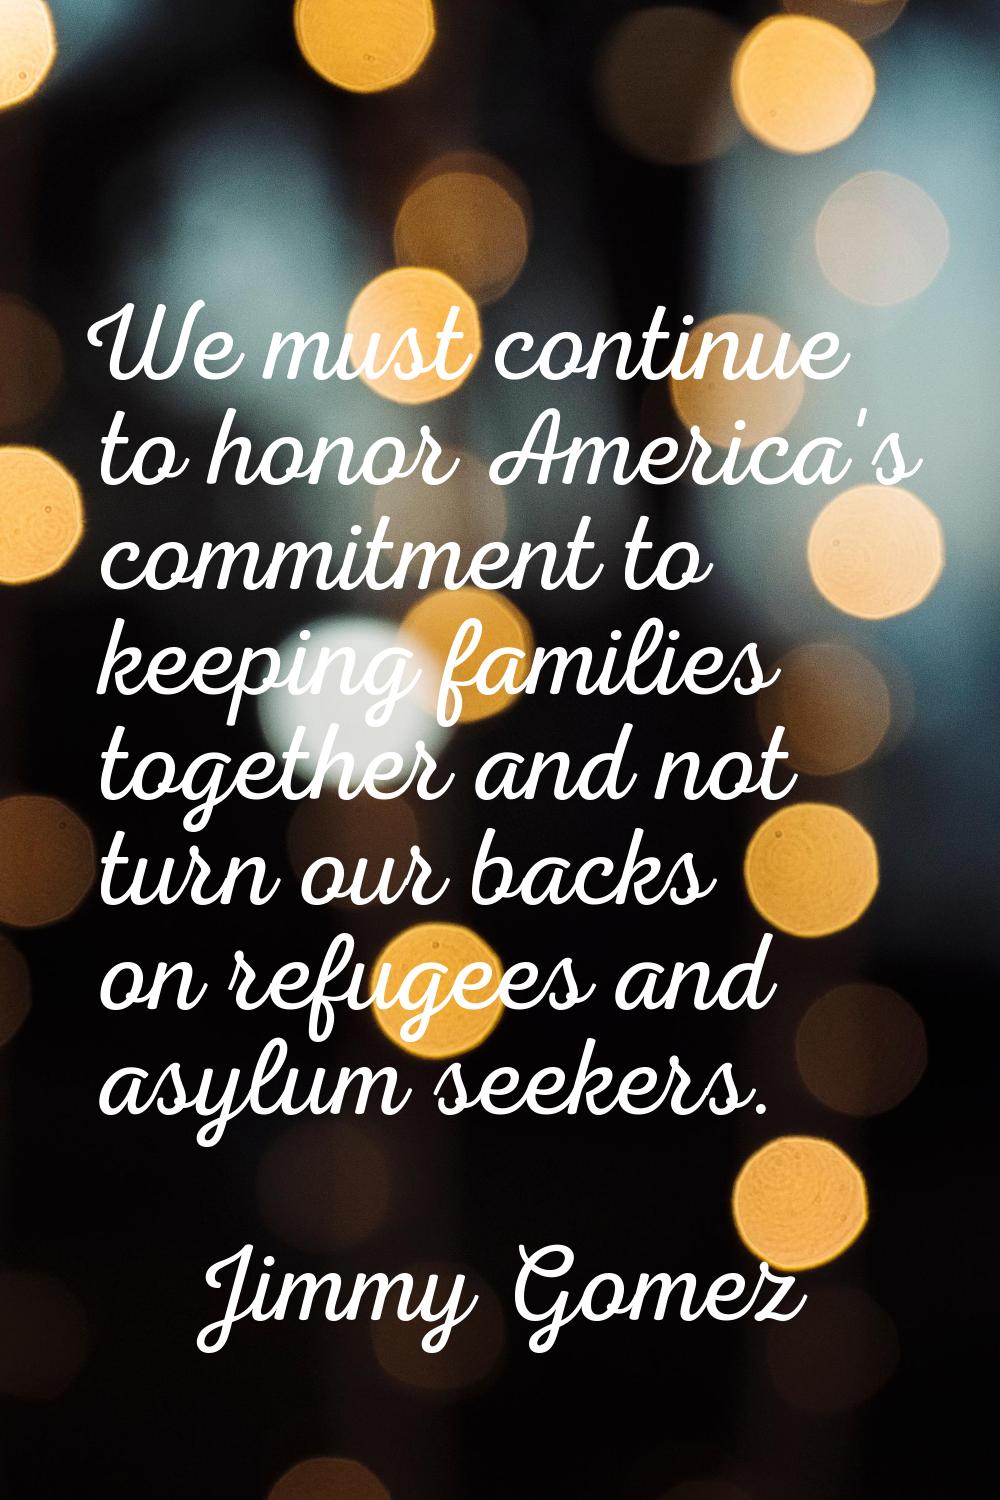 We must continue to honor America's commitment to keeping families together and not turn our backs 